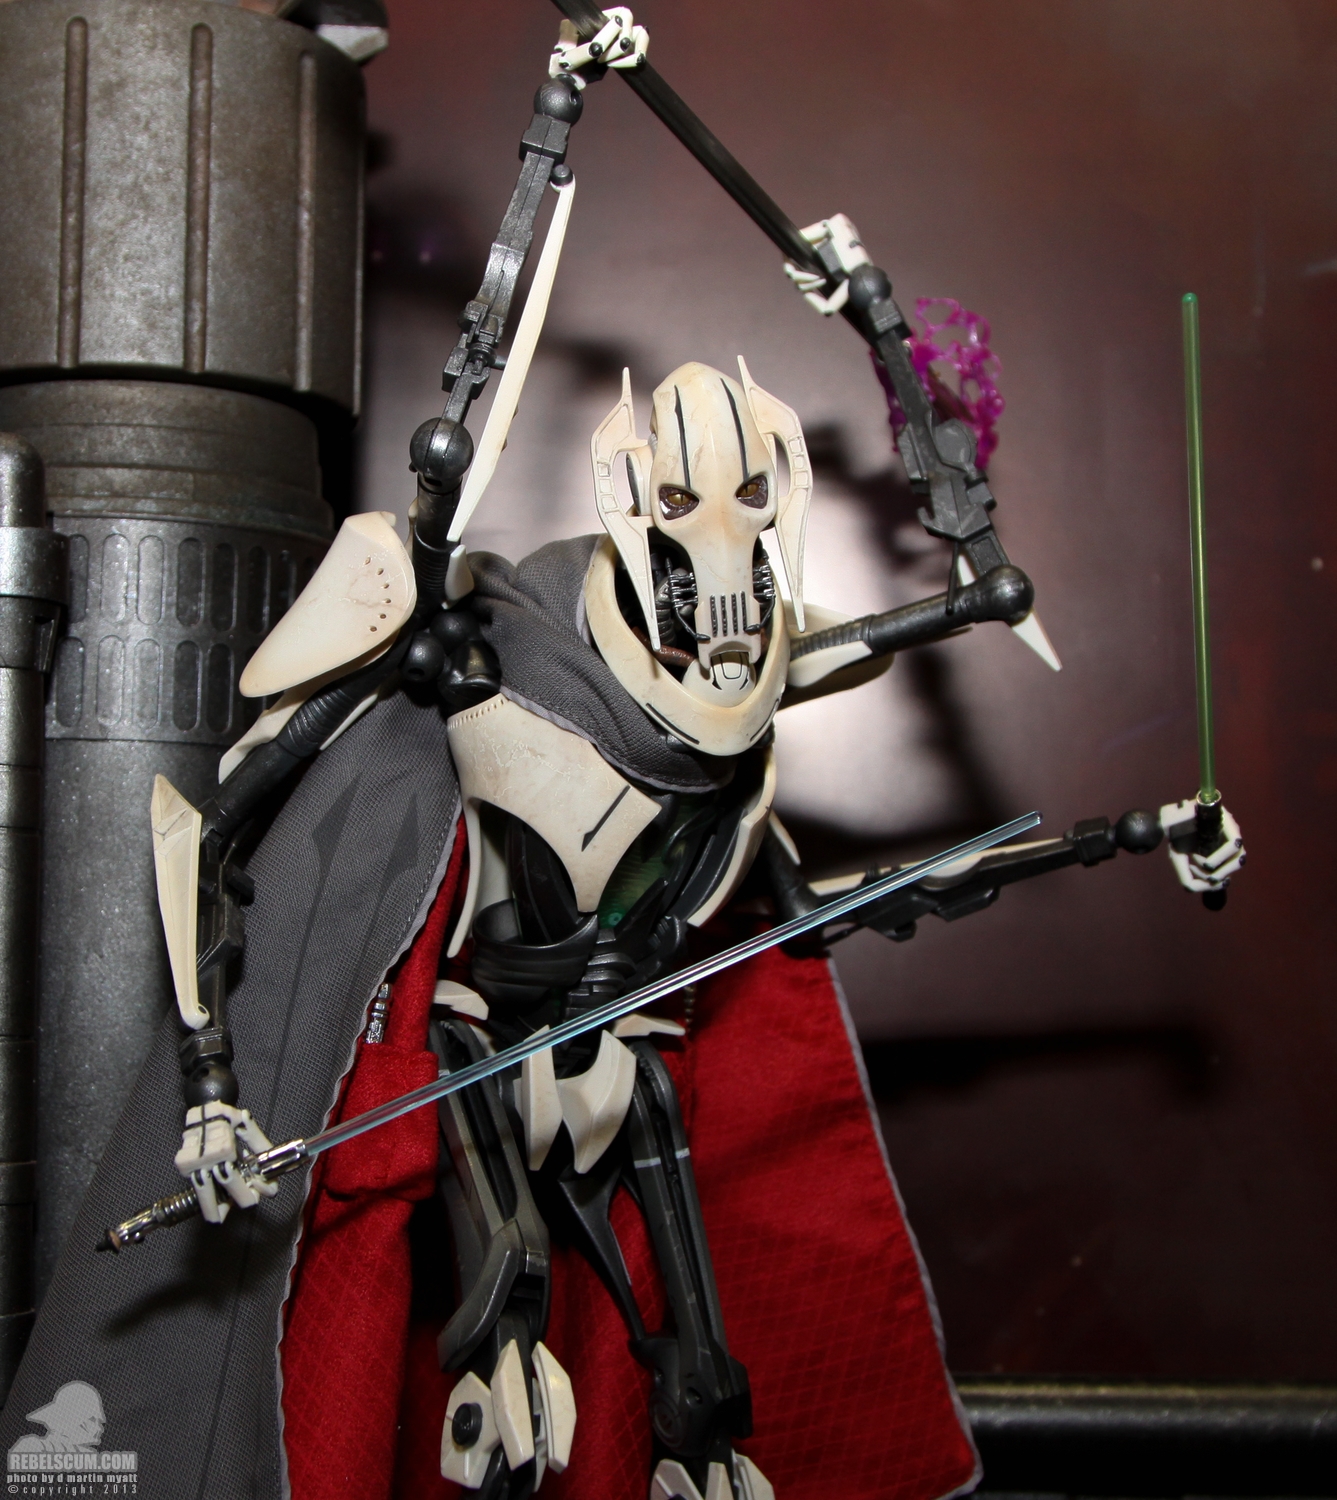 SDCC_2013_Sideshow_Collectibles_Star_Wars_Wed-035.jpg